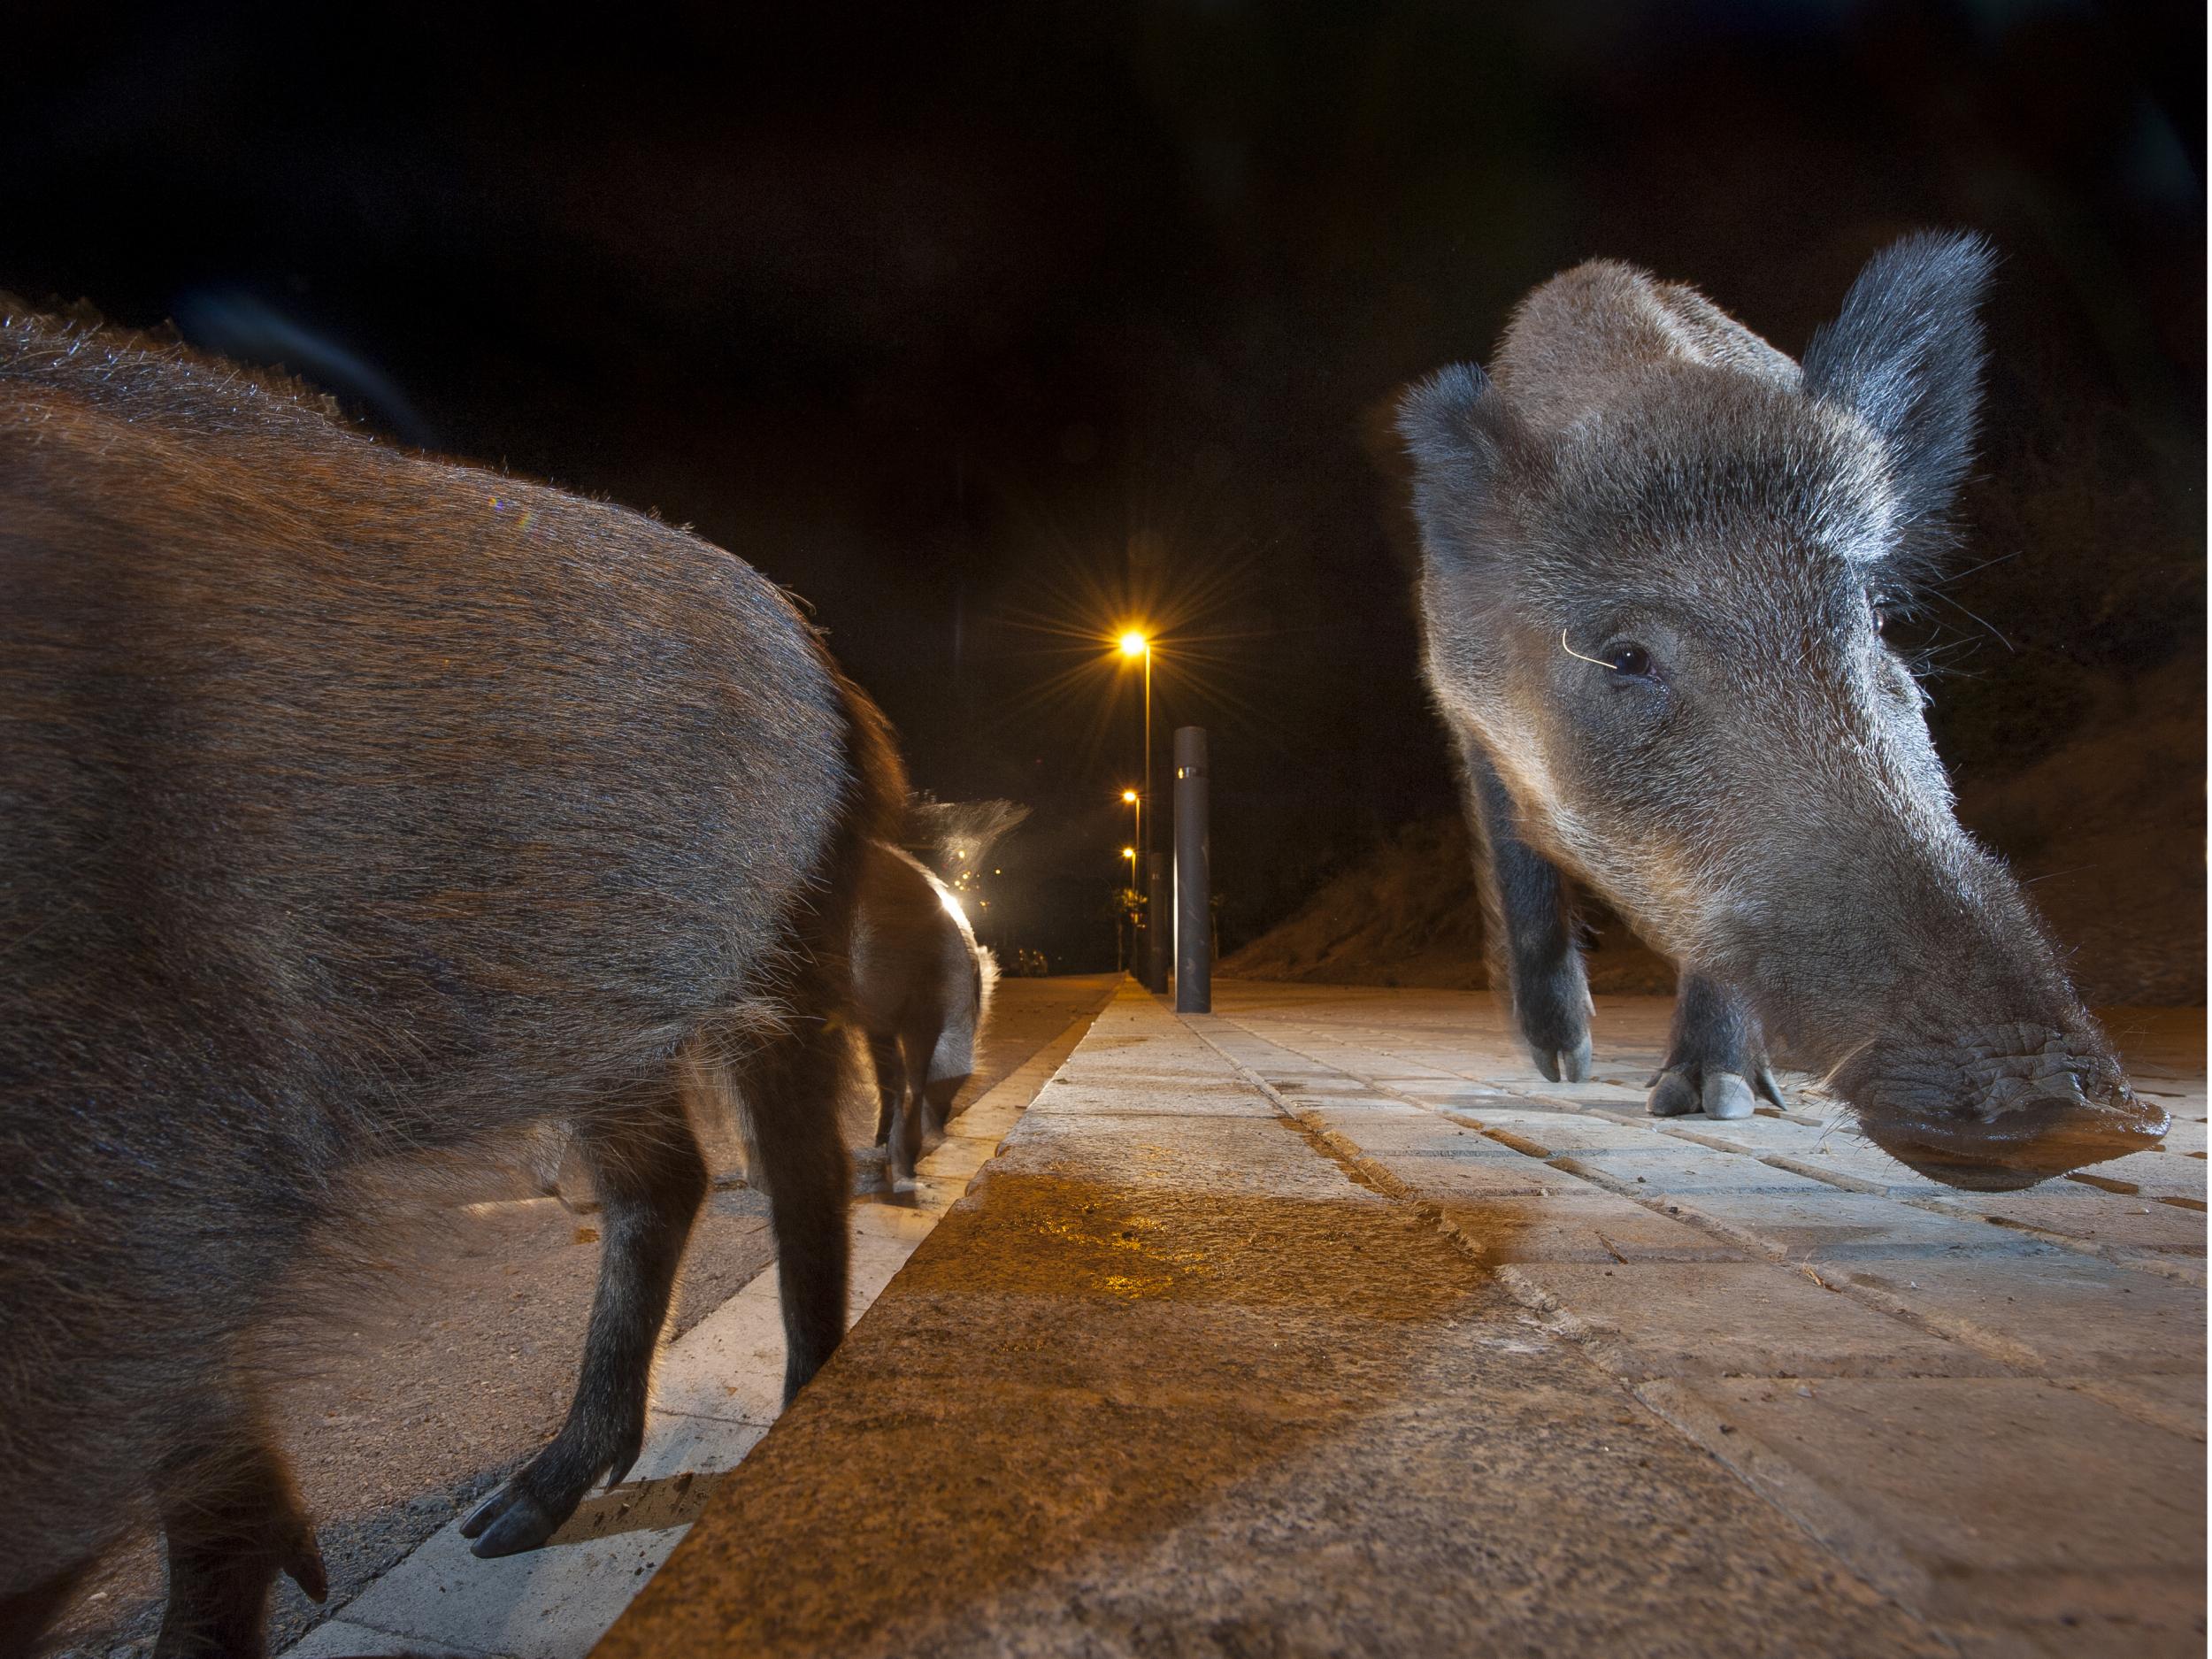 Wild boar foraging for food near bins in Barcelona: animals are increasingly being forced to emerge at night to avoid contact with humans